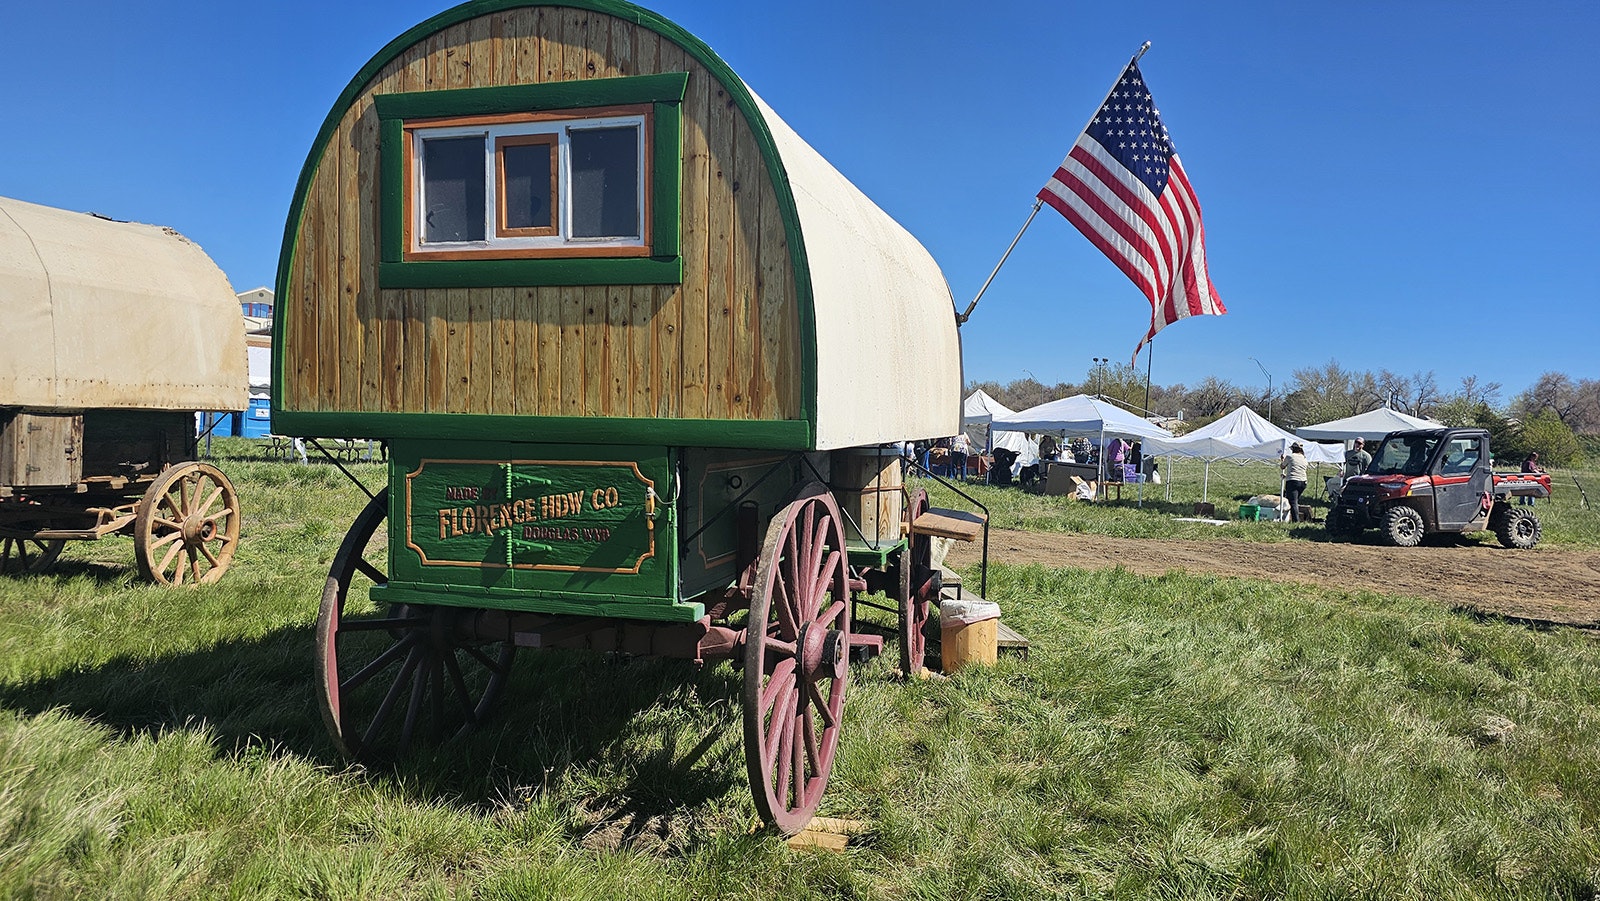 The back of The Pearl sheep wagon at Gillette's third annual Sheepherding Festival. Some sheep wagons have a chuckwagon-type cook station in the back, others have an area to store staples like beans and flour.